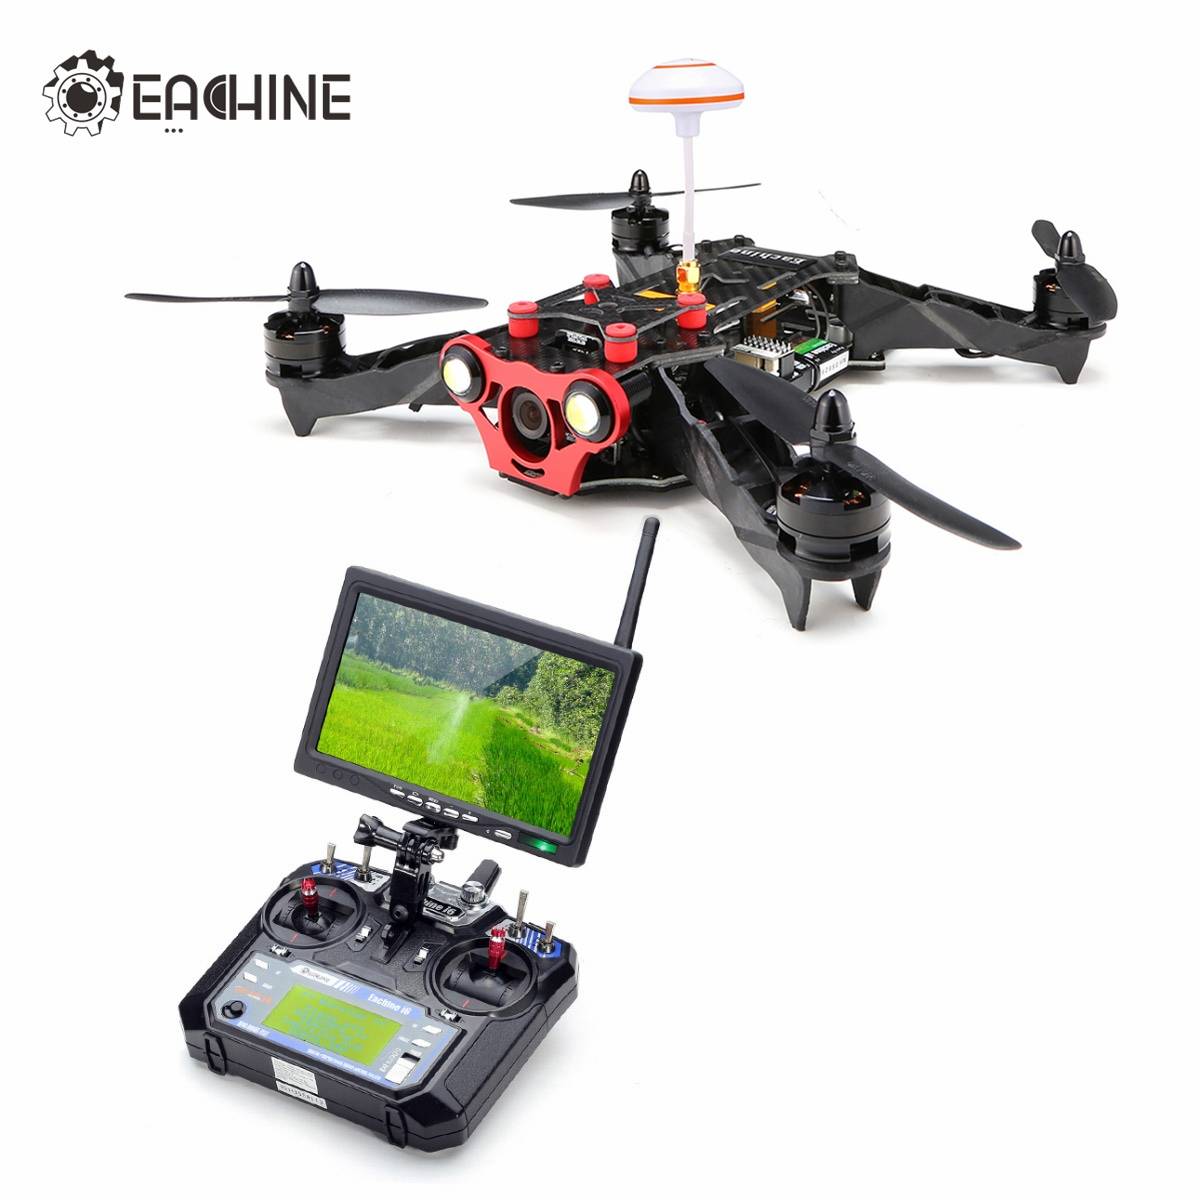 Eachine Racer 250 - My First FPV Aaircraft - Discount $10 OFF, $20 OFF, $30 OFF